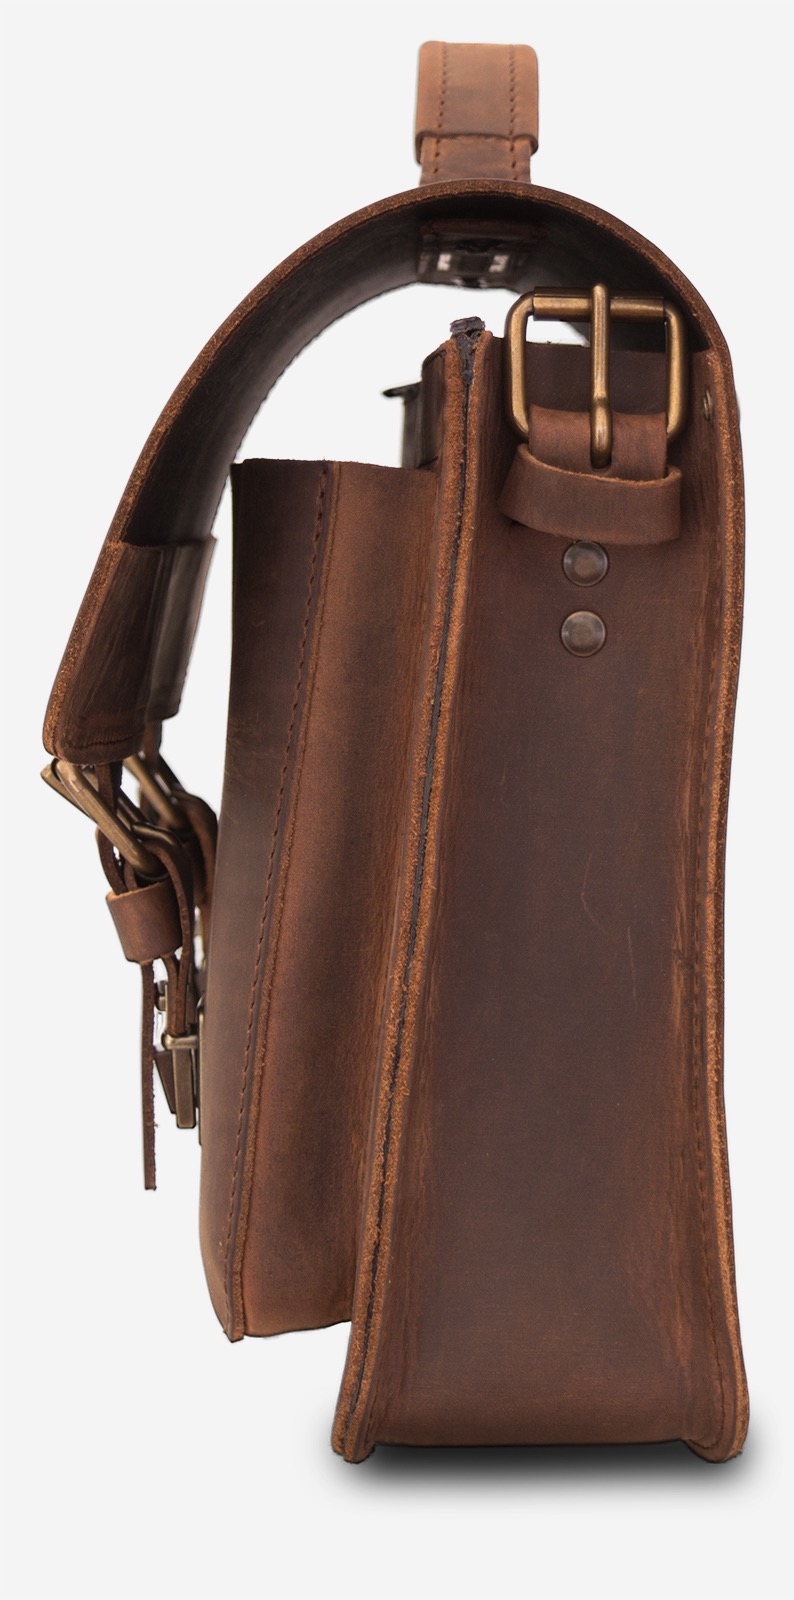 Side view of the brown leather satchel briefcase with one main compartment and two front pockets.